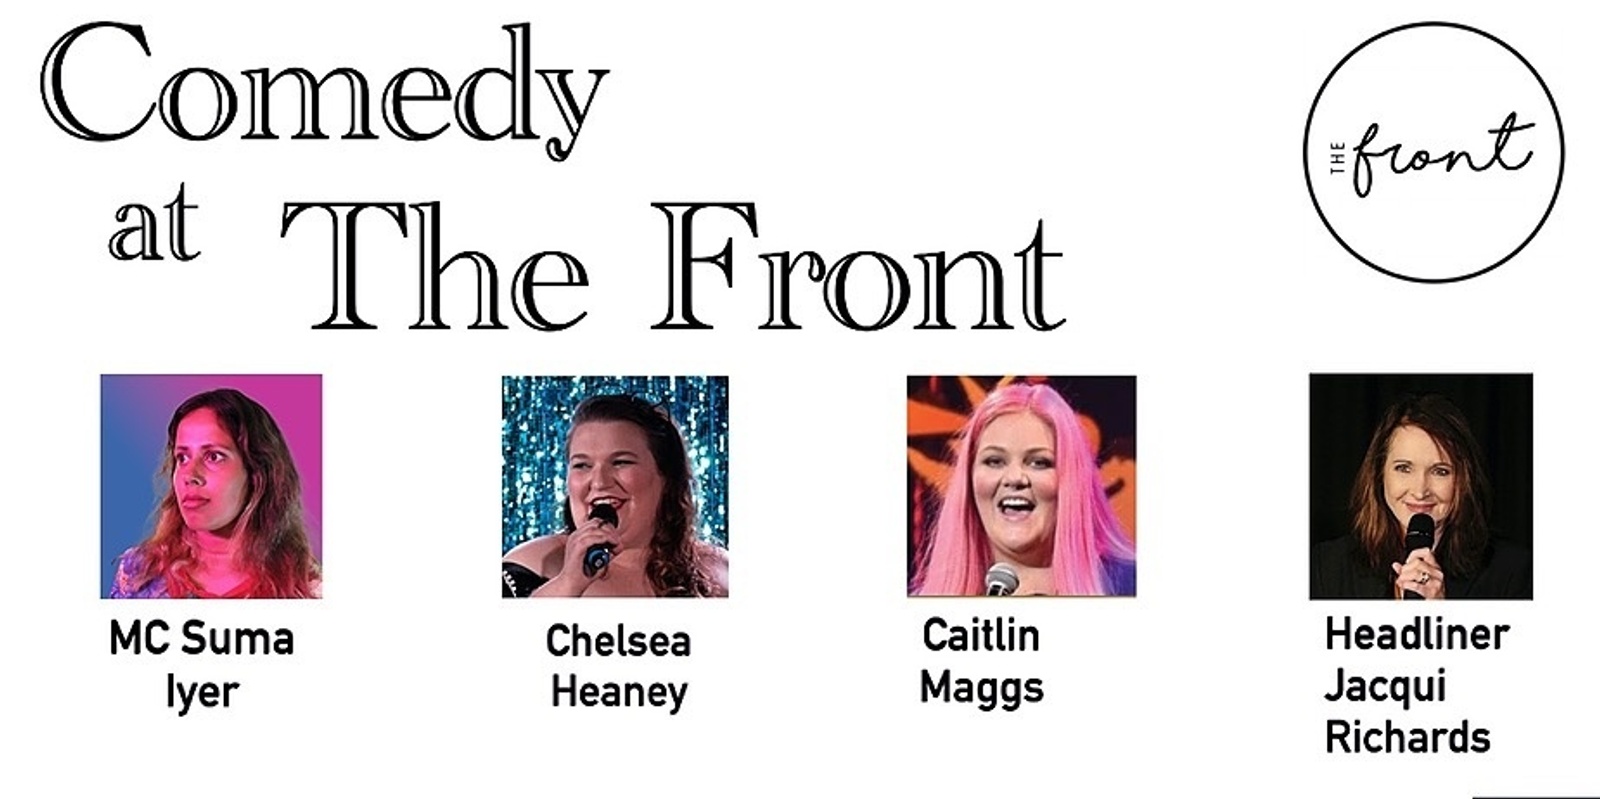 Banner image for Comedy at The Front - Feb: Jacqui Richards